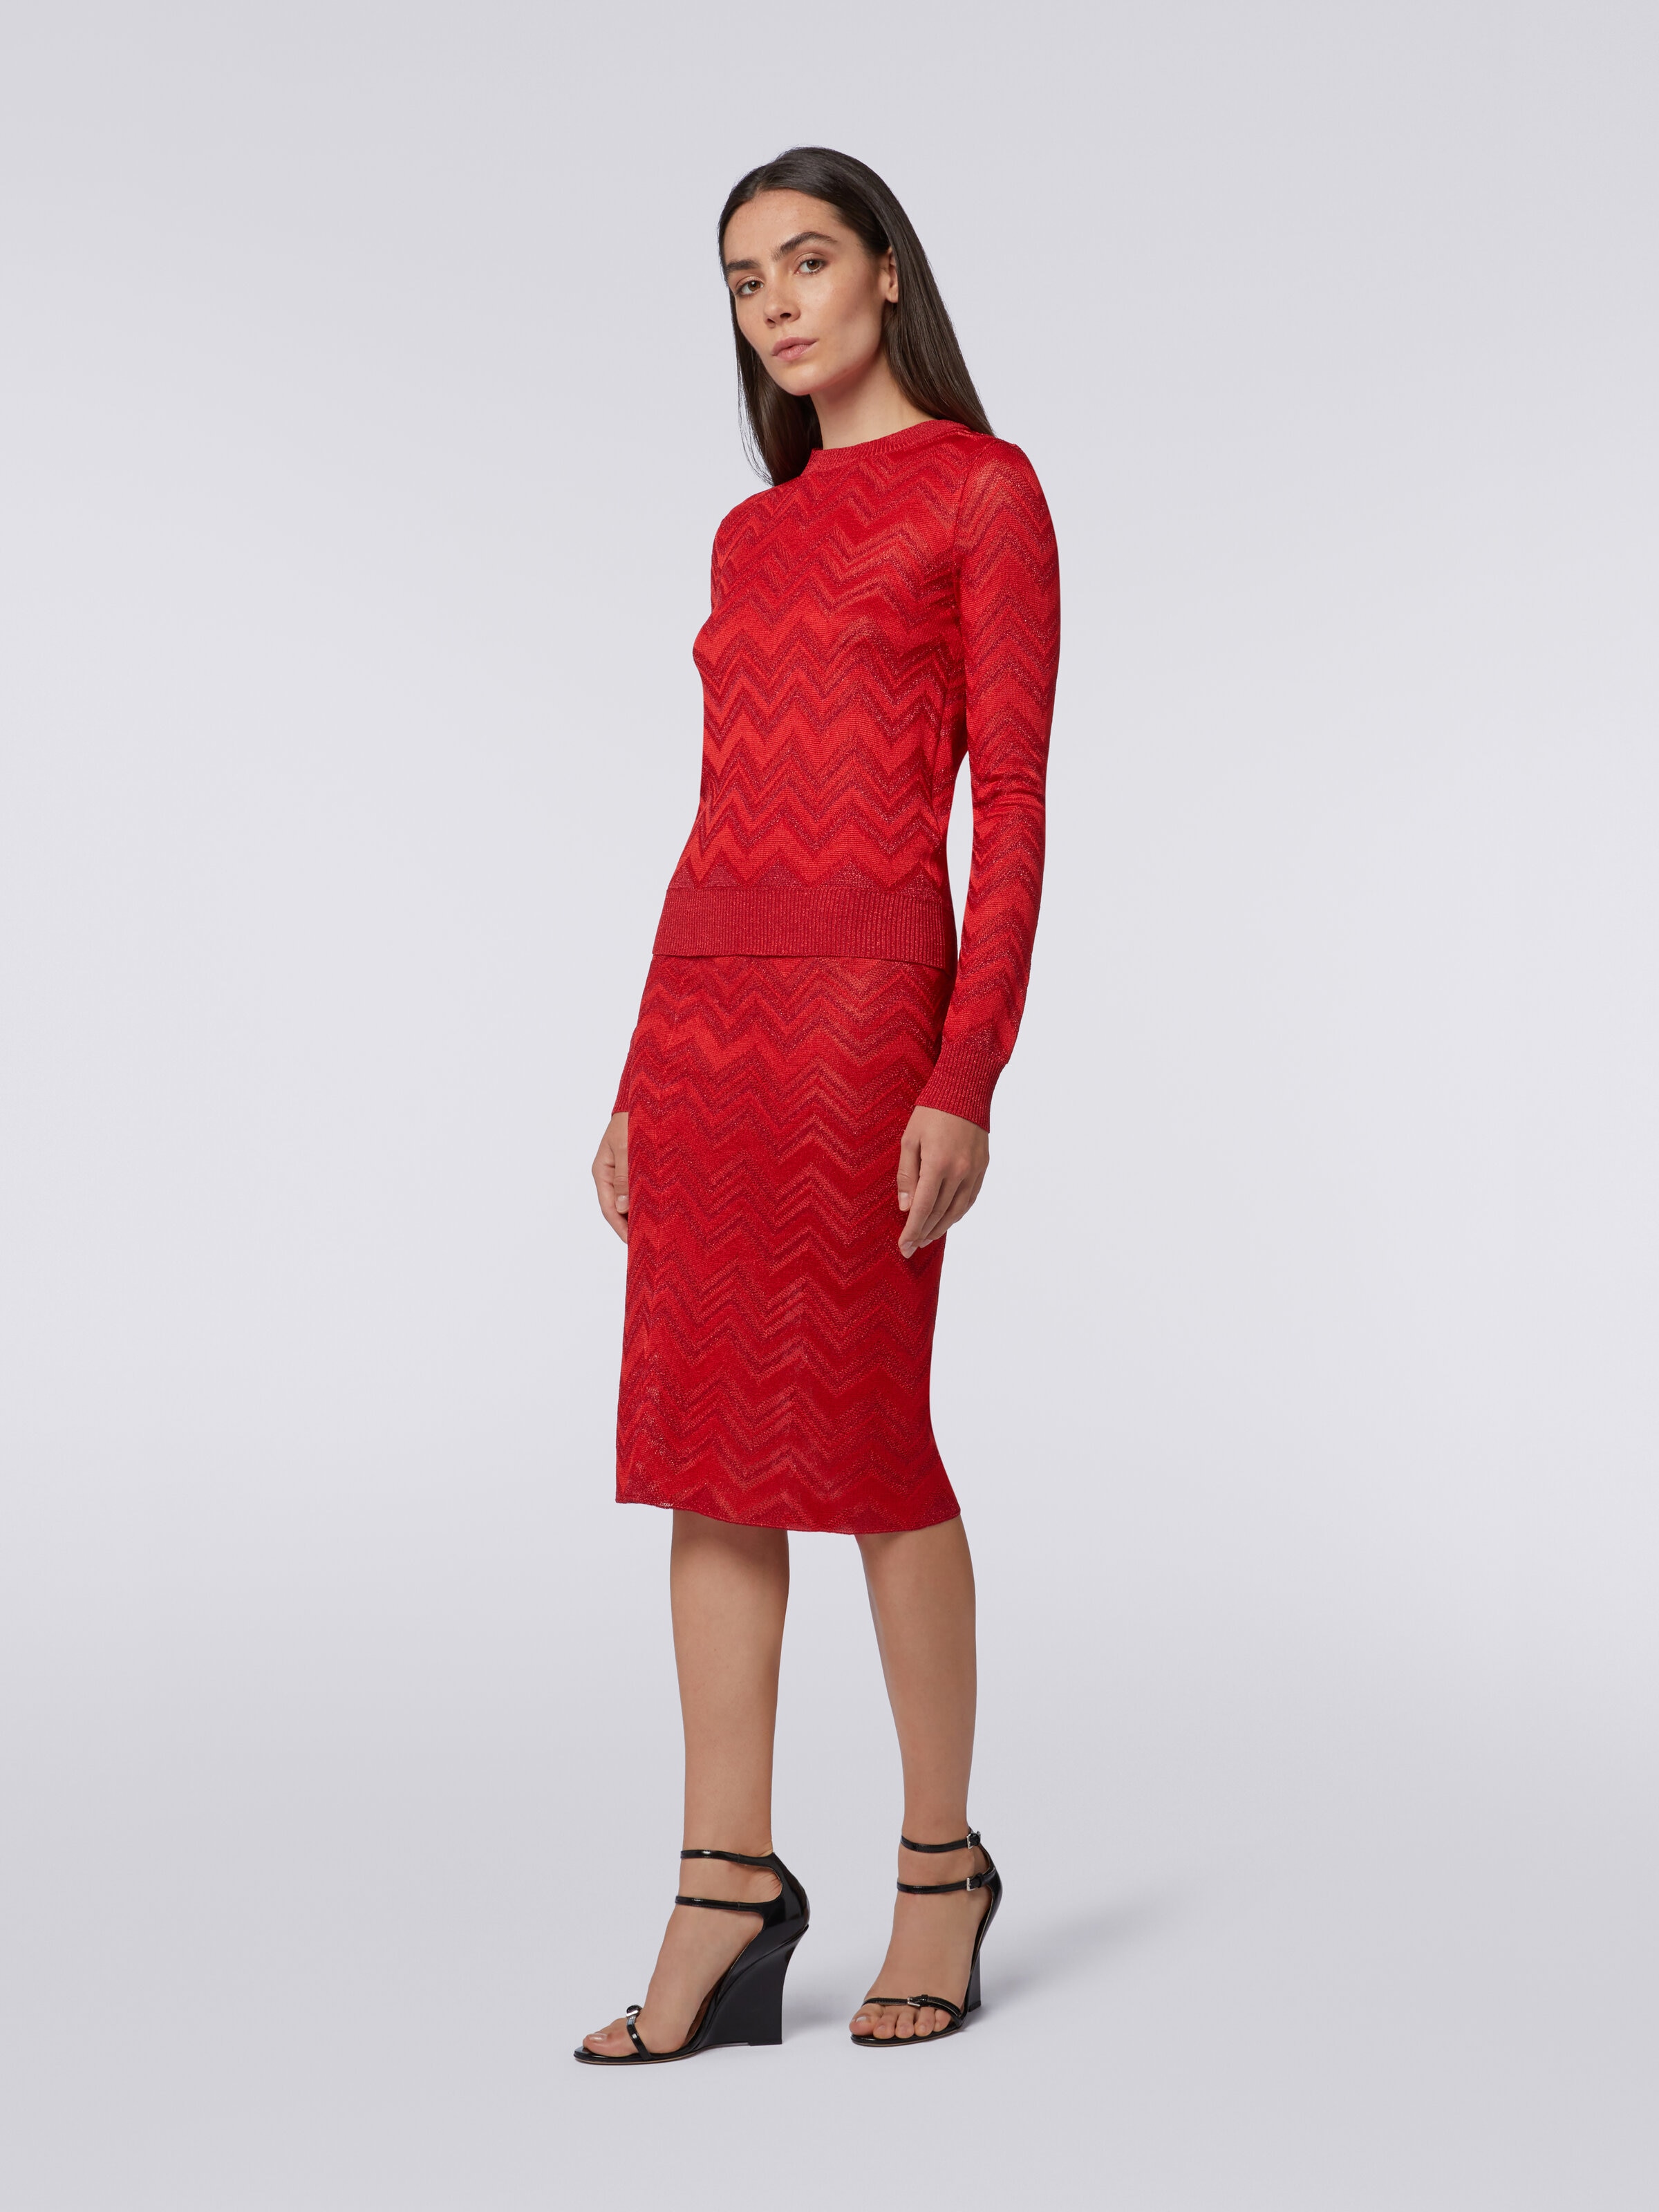 Longuette skirt in zigzag knit with lurex, Red  - 2